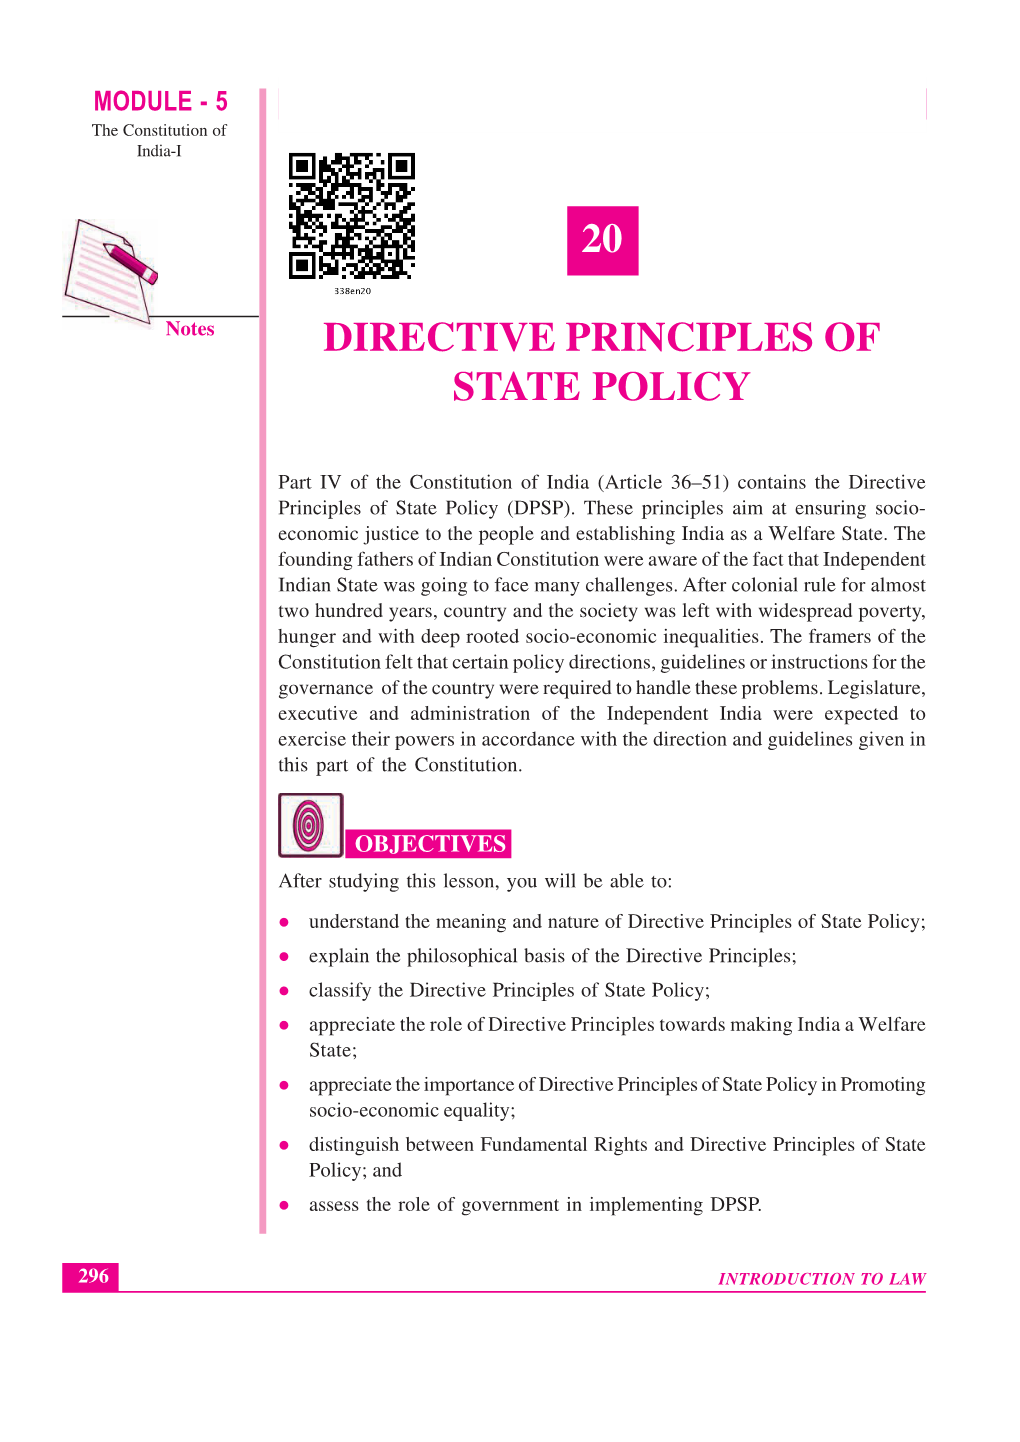 20 Directive Principles of State Policy